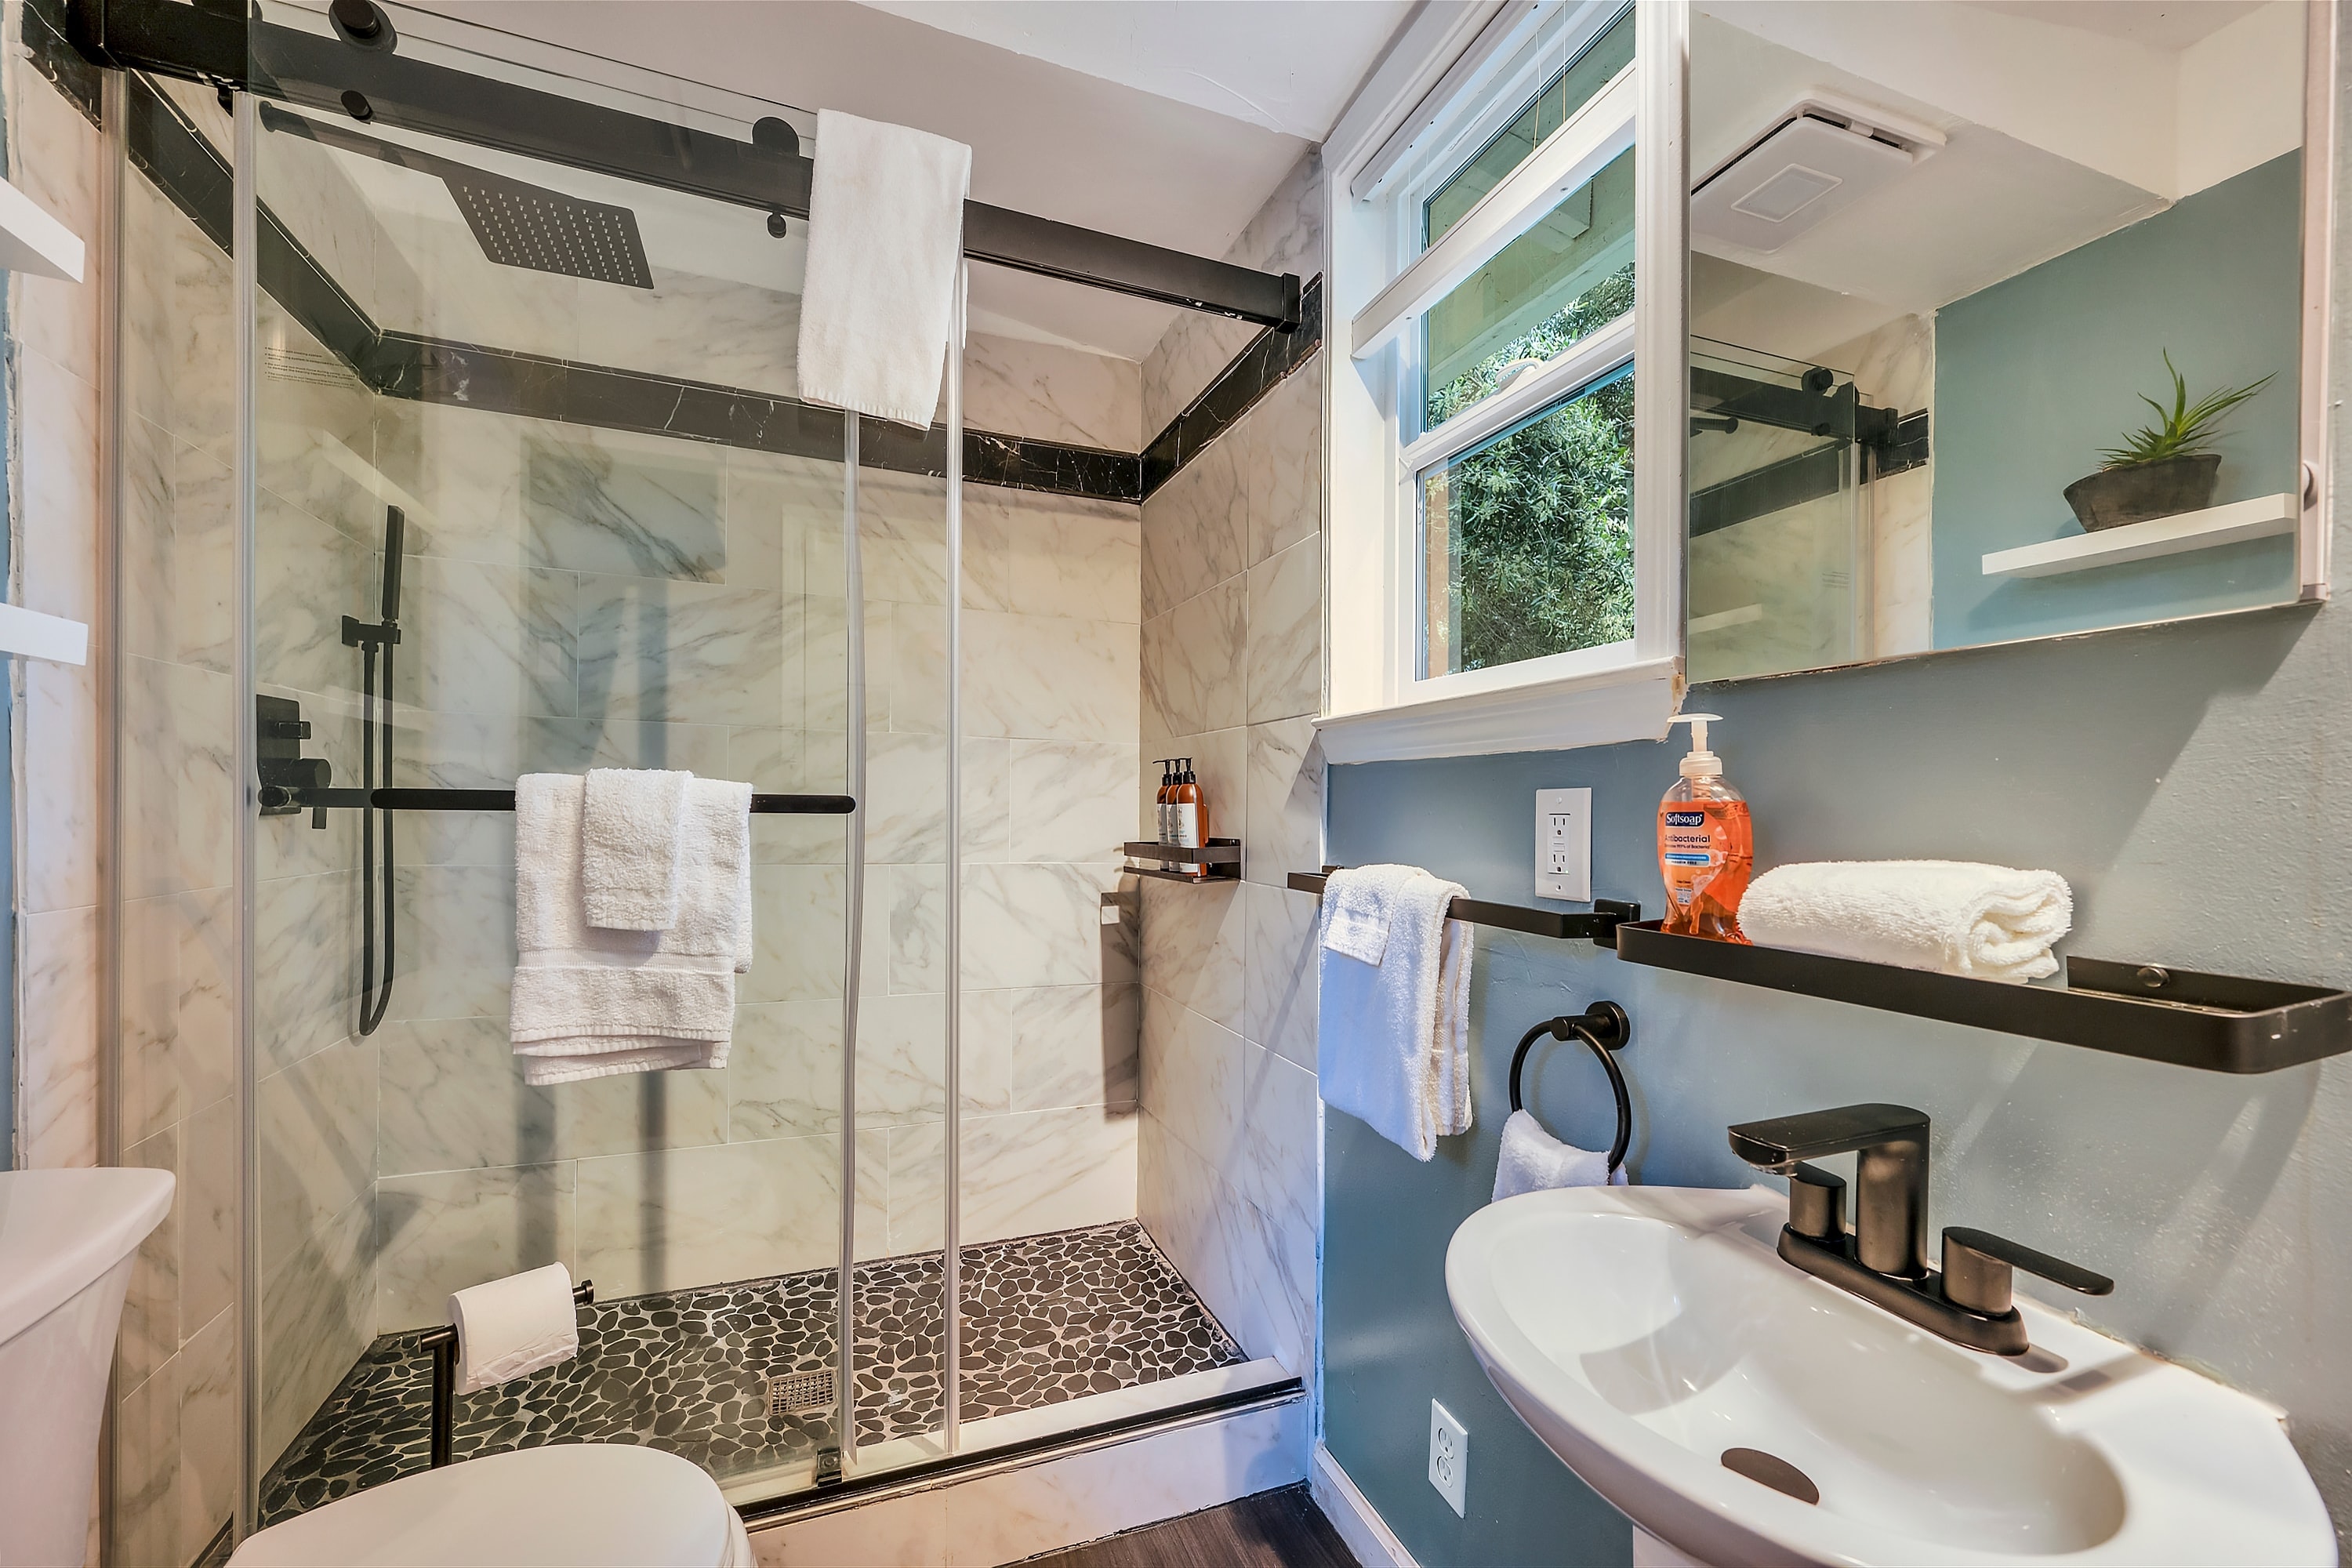 Primary bedroom's ensuite bathroom offers a shower.